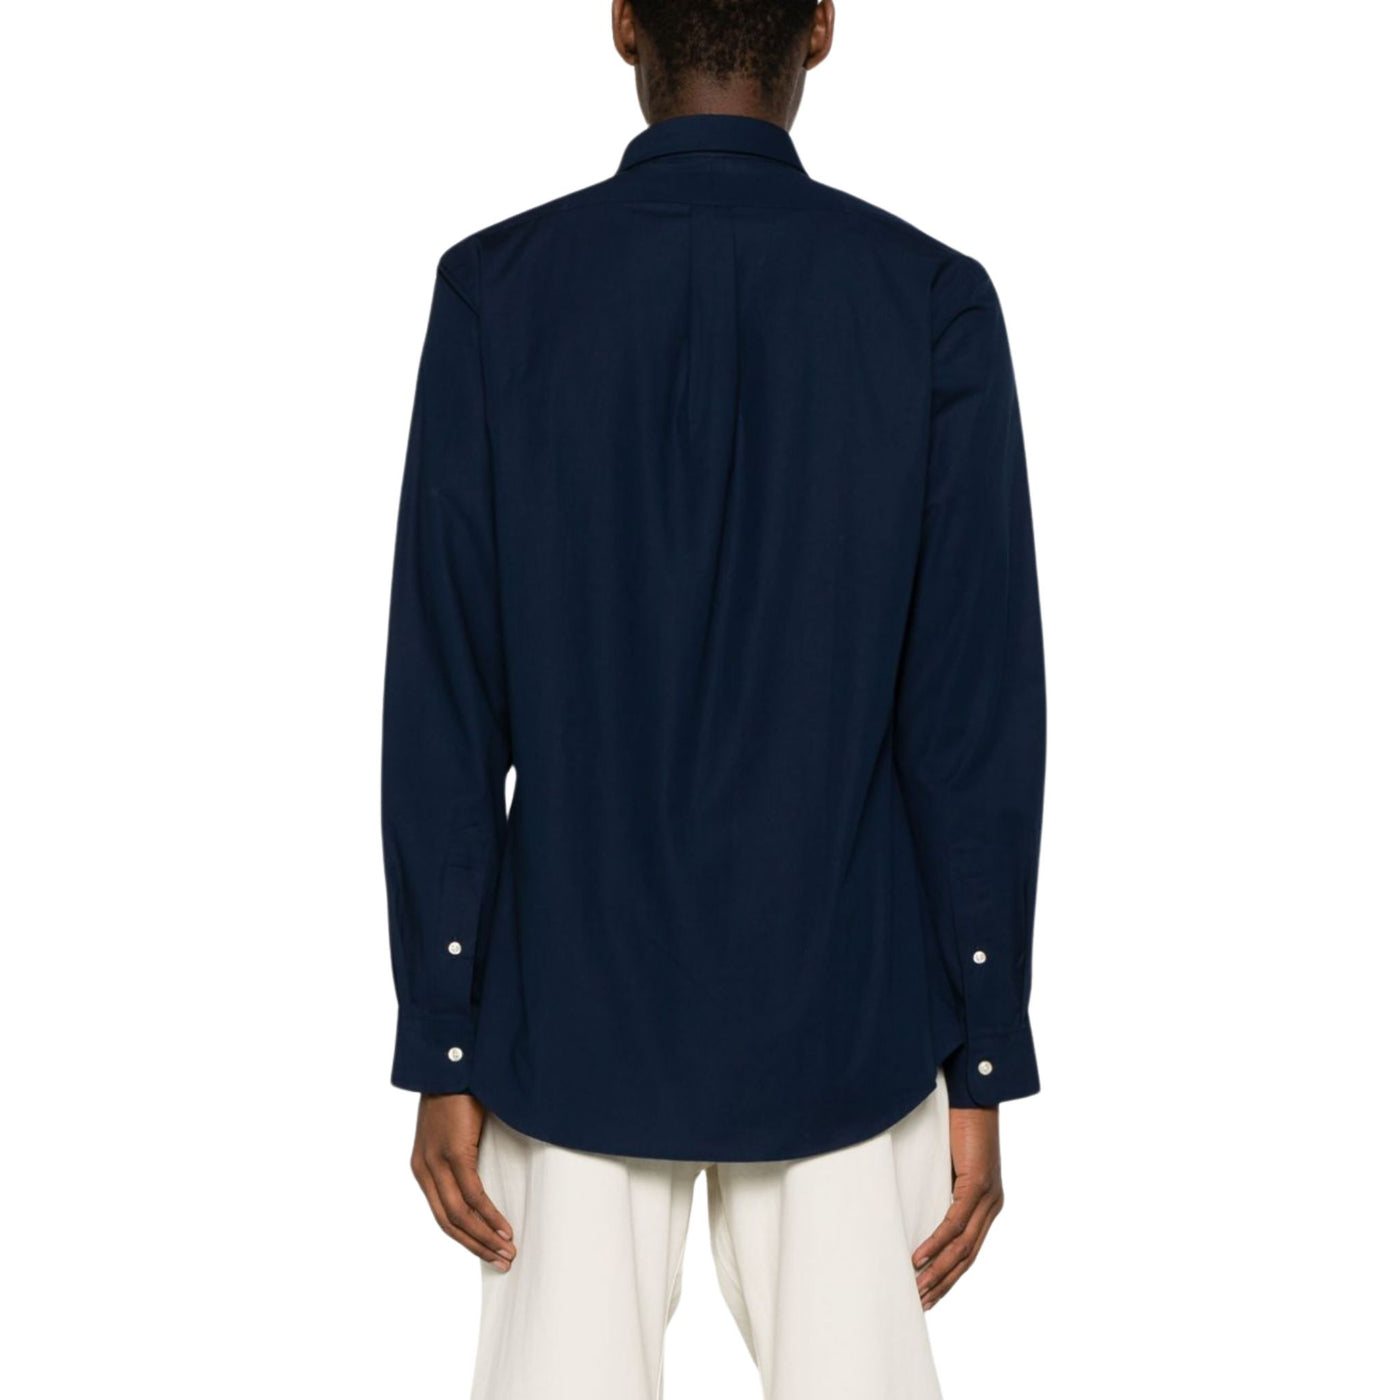 Men's shirt with contrasting pony